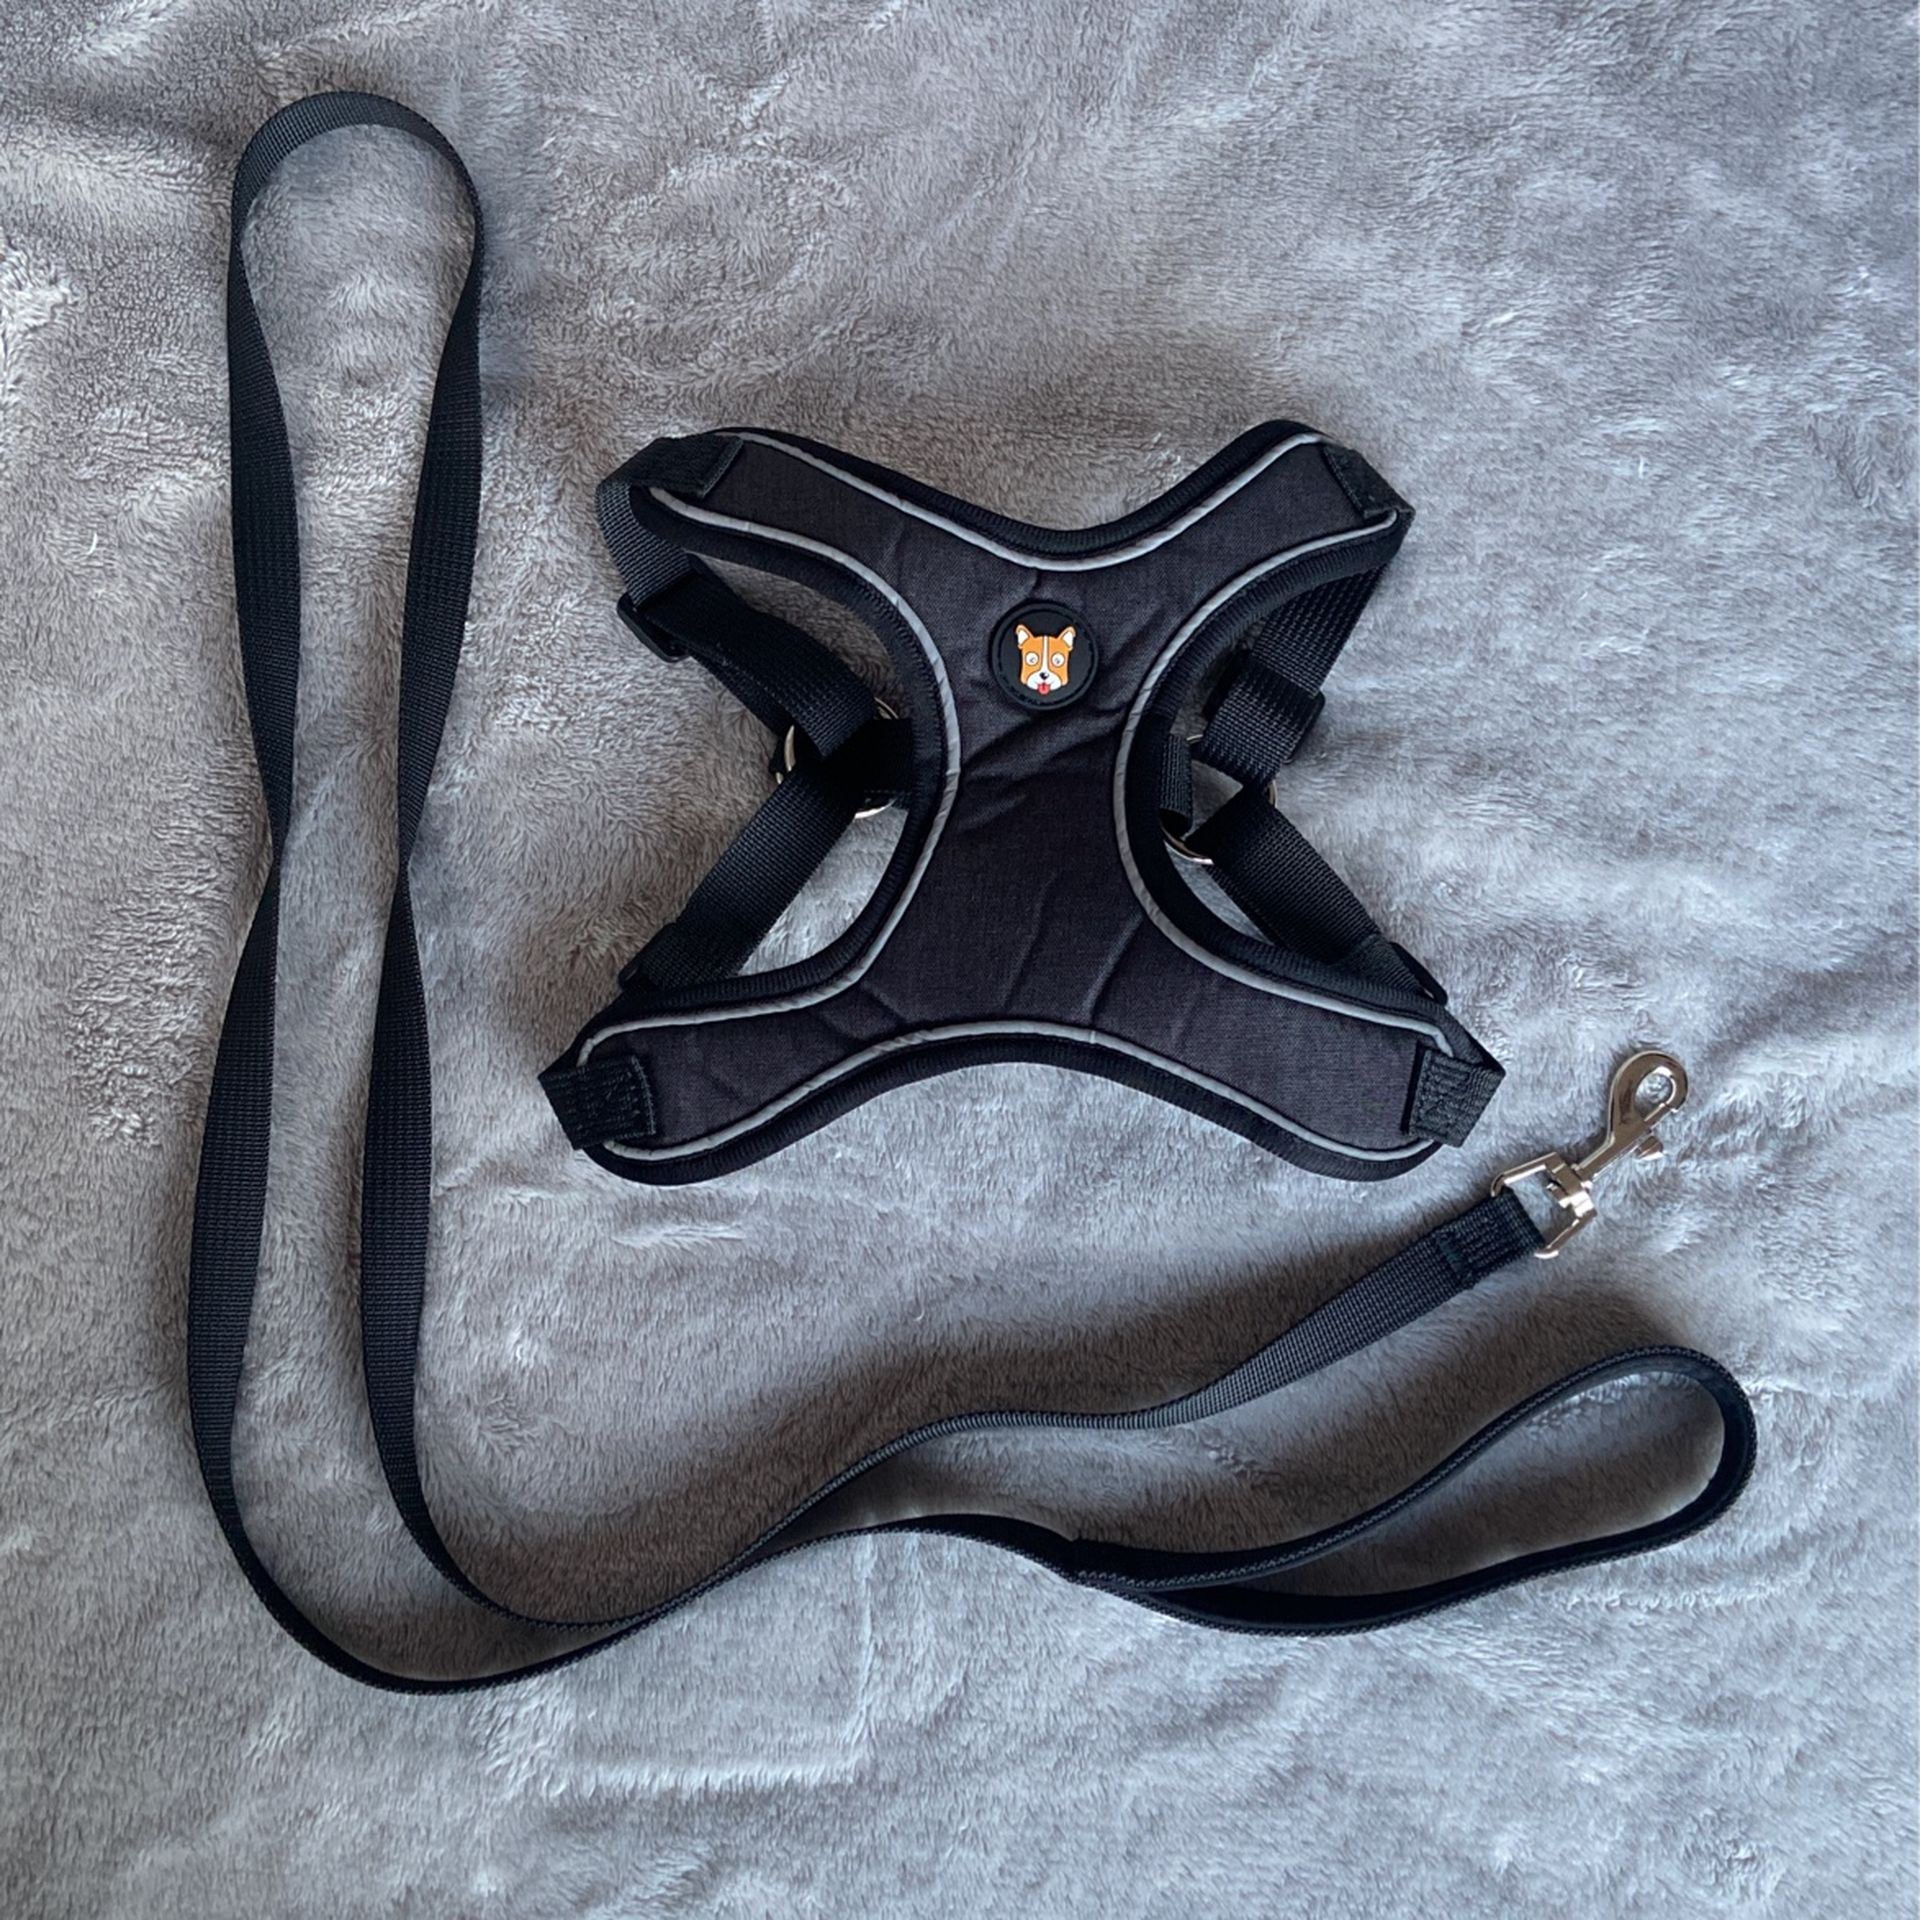 Dog Harness Vest And Leash Set For Medium Dogs